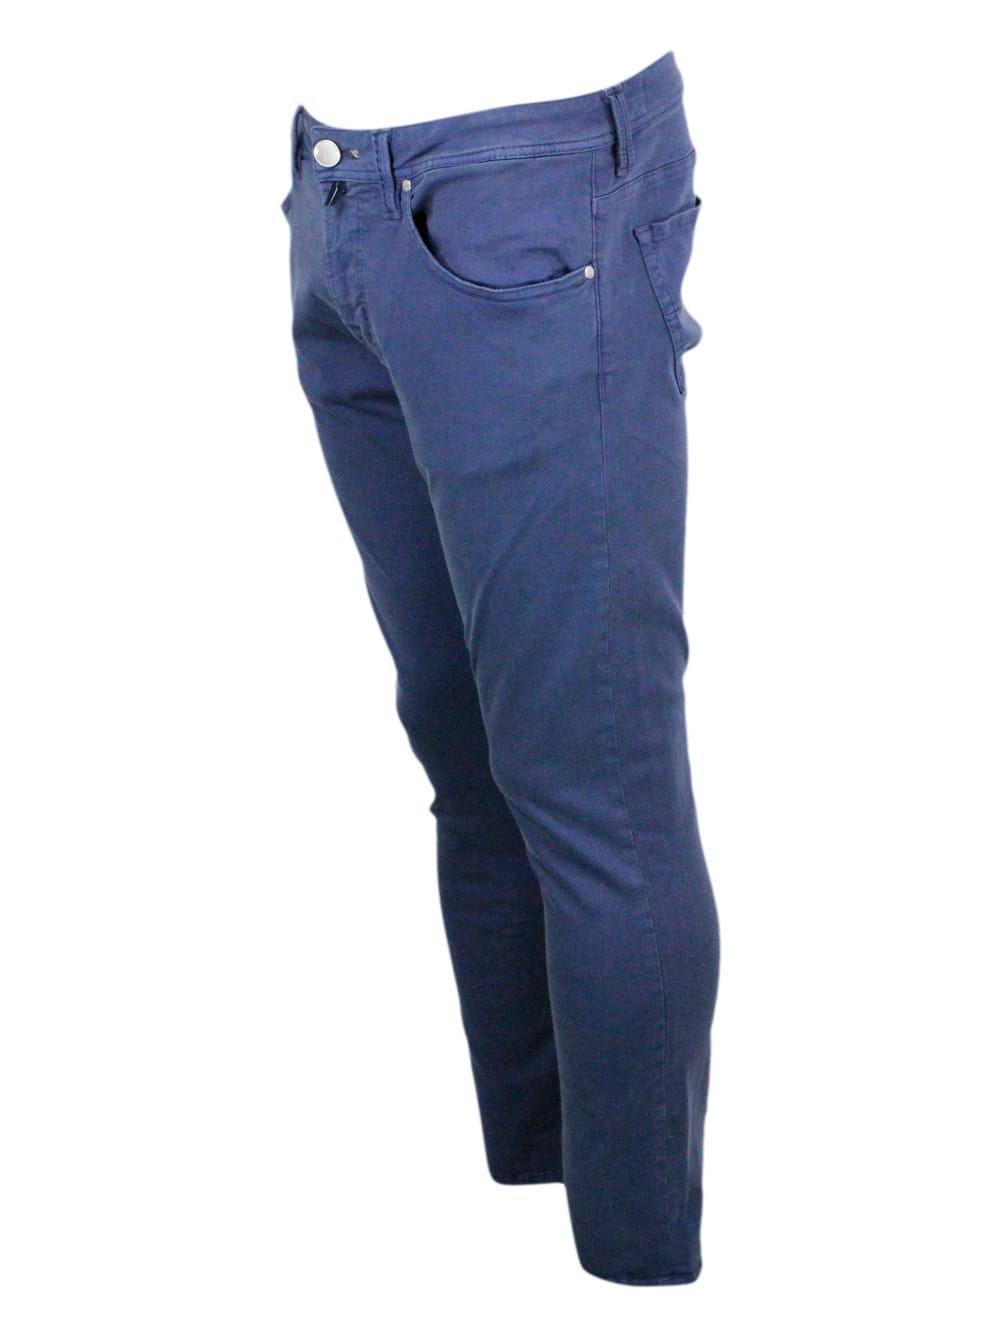 Shop Sartoria Tramarossa Leonardo Slim Zip Trousers In Soft Cotton With 5 Pockets With Tailored Stitching And Suede Tab. Zip  In Blu Light